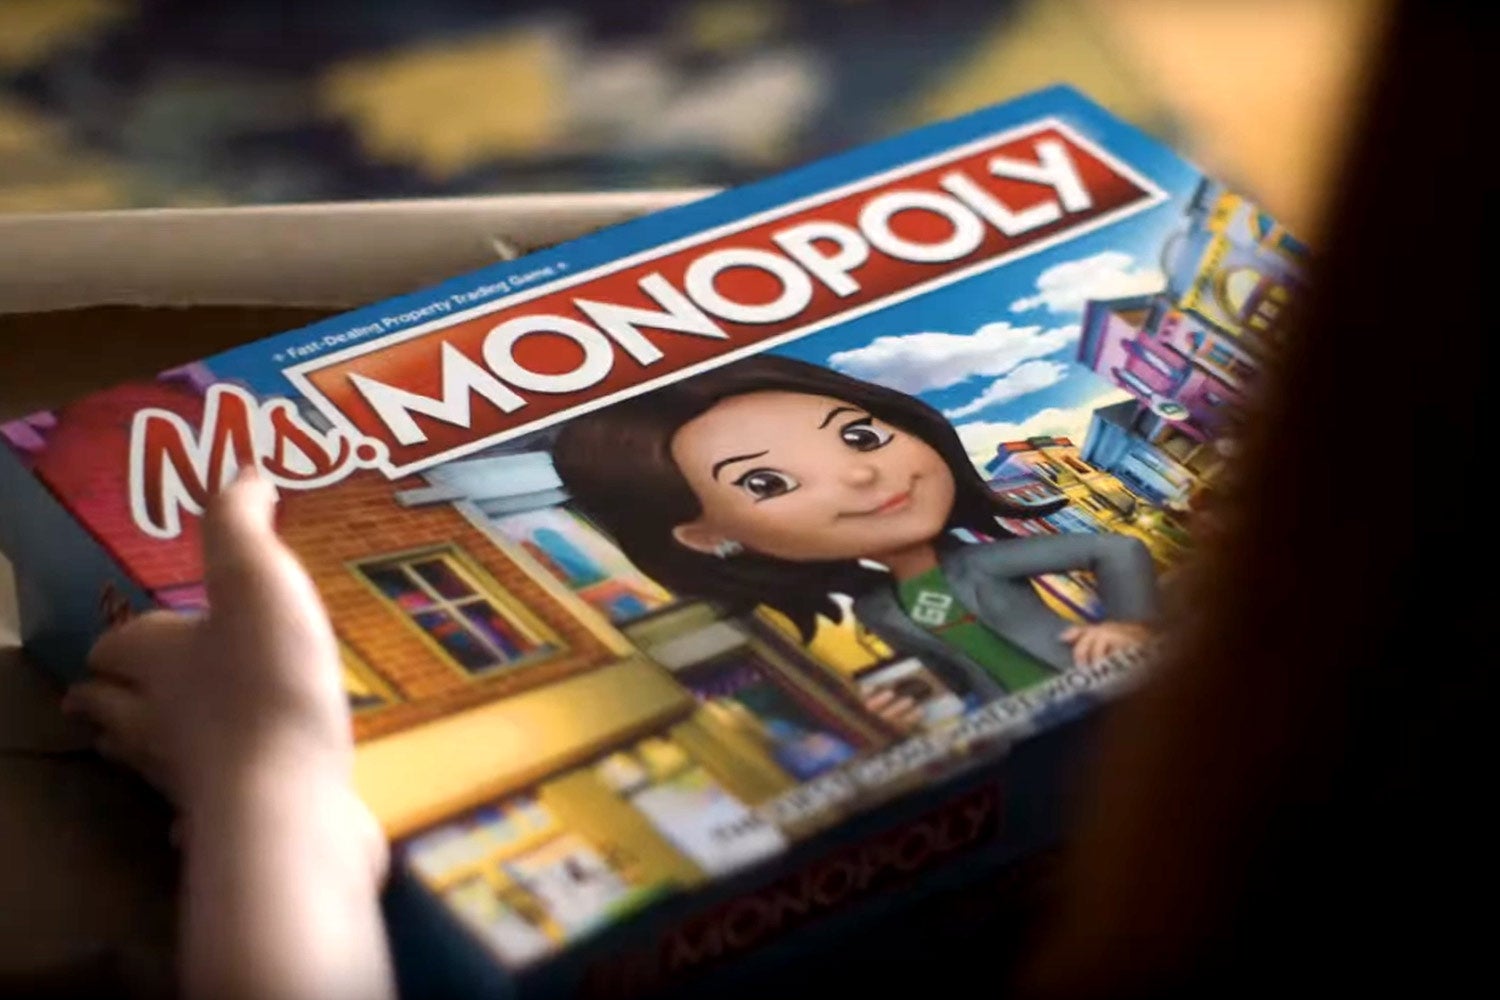 ms monopoly commercial without women